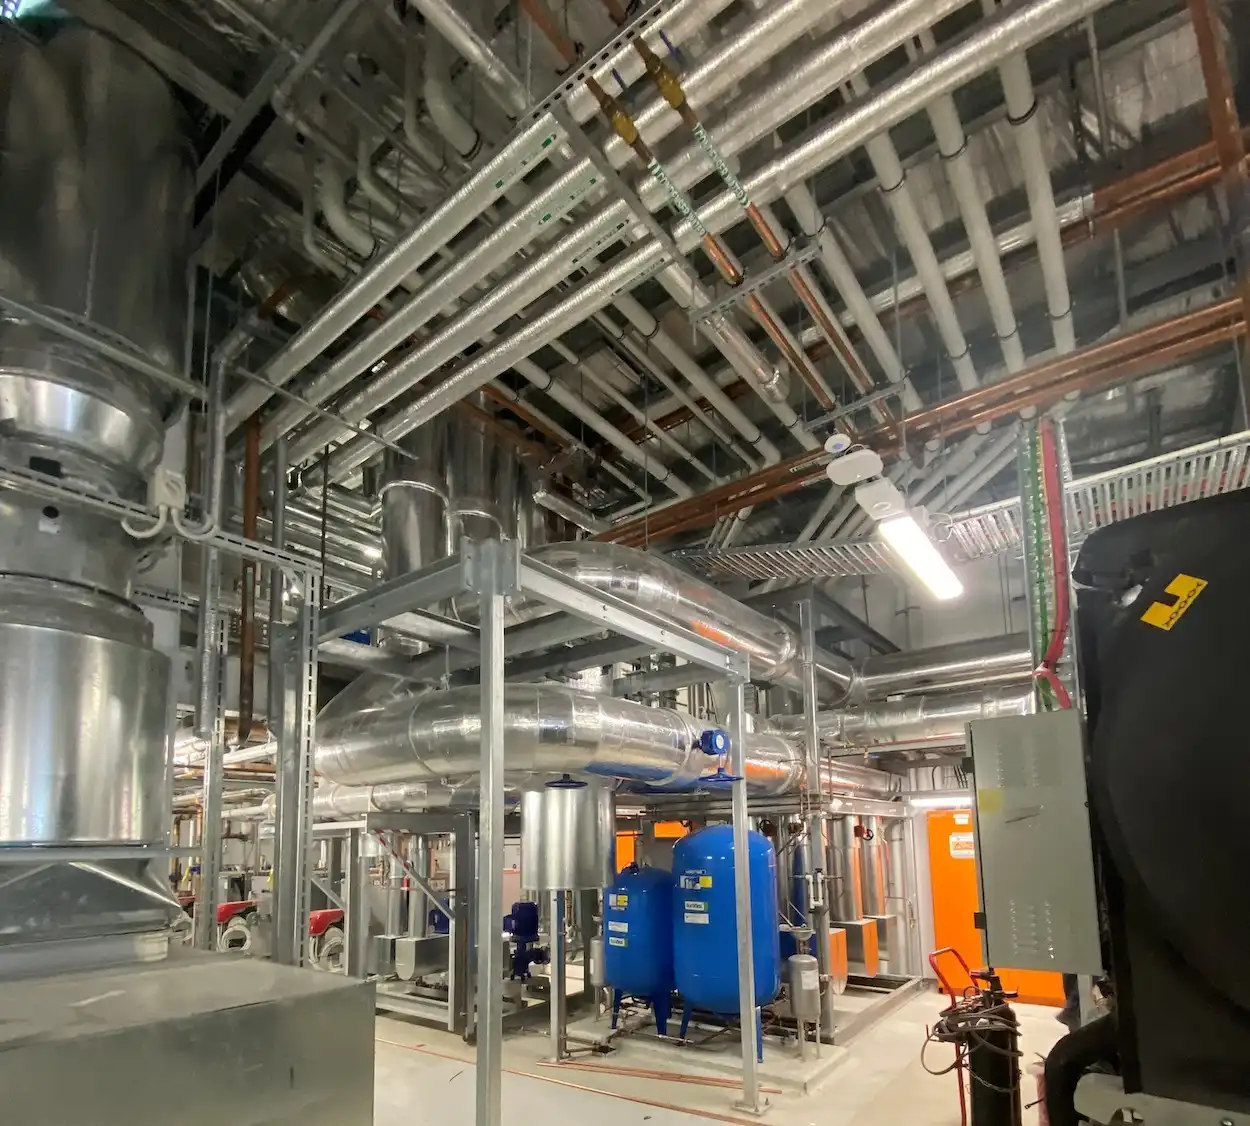 Piping installed by Industrial Medical Piping at the Sky City casino in Adelaide, South Australia.